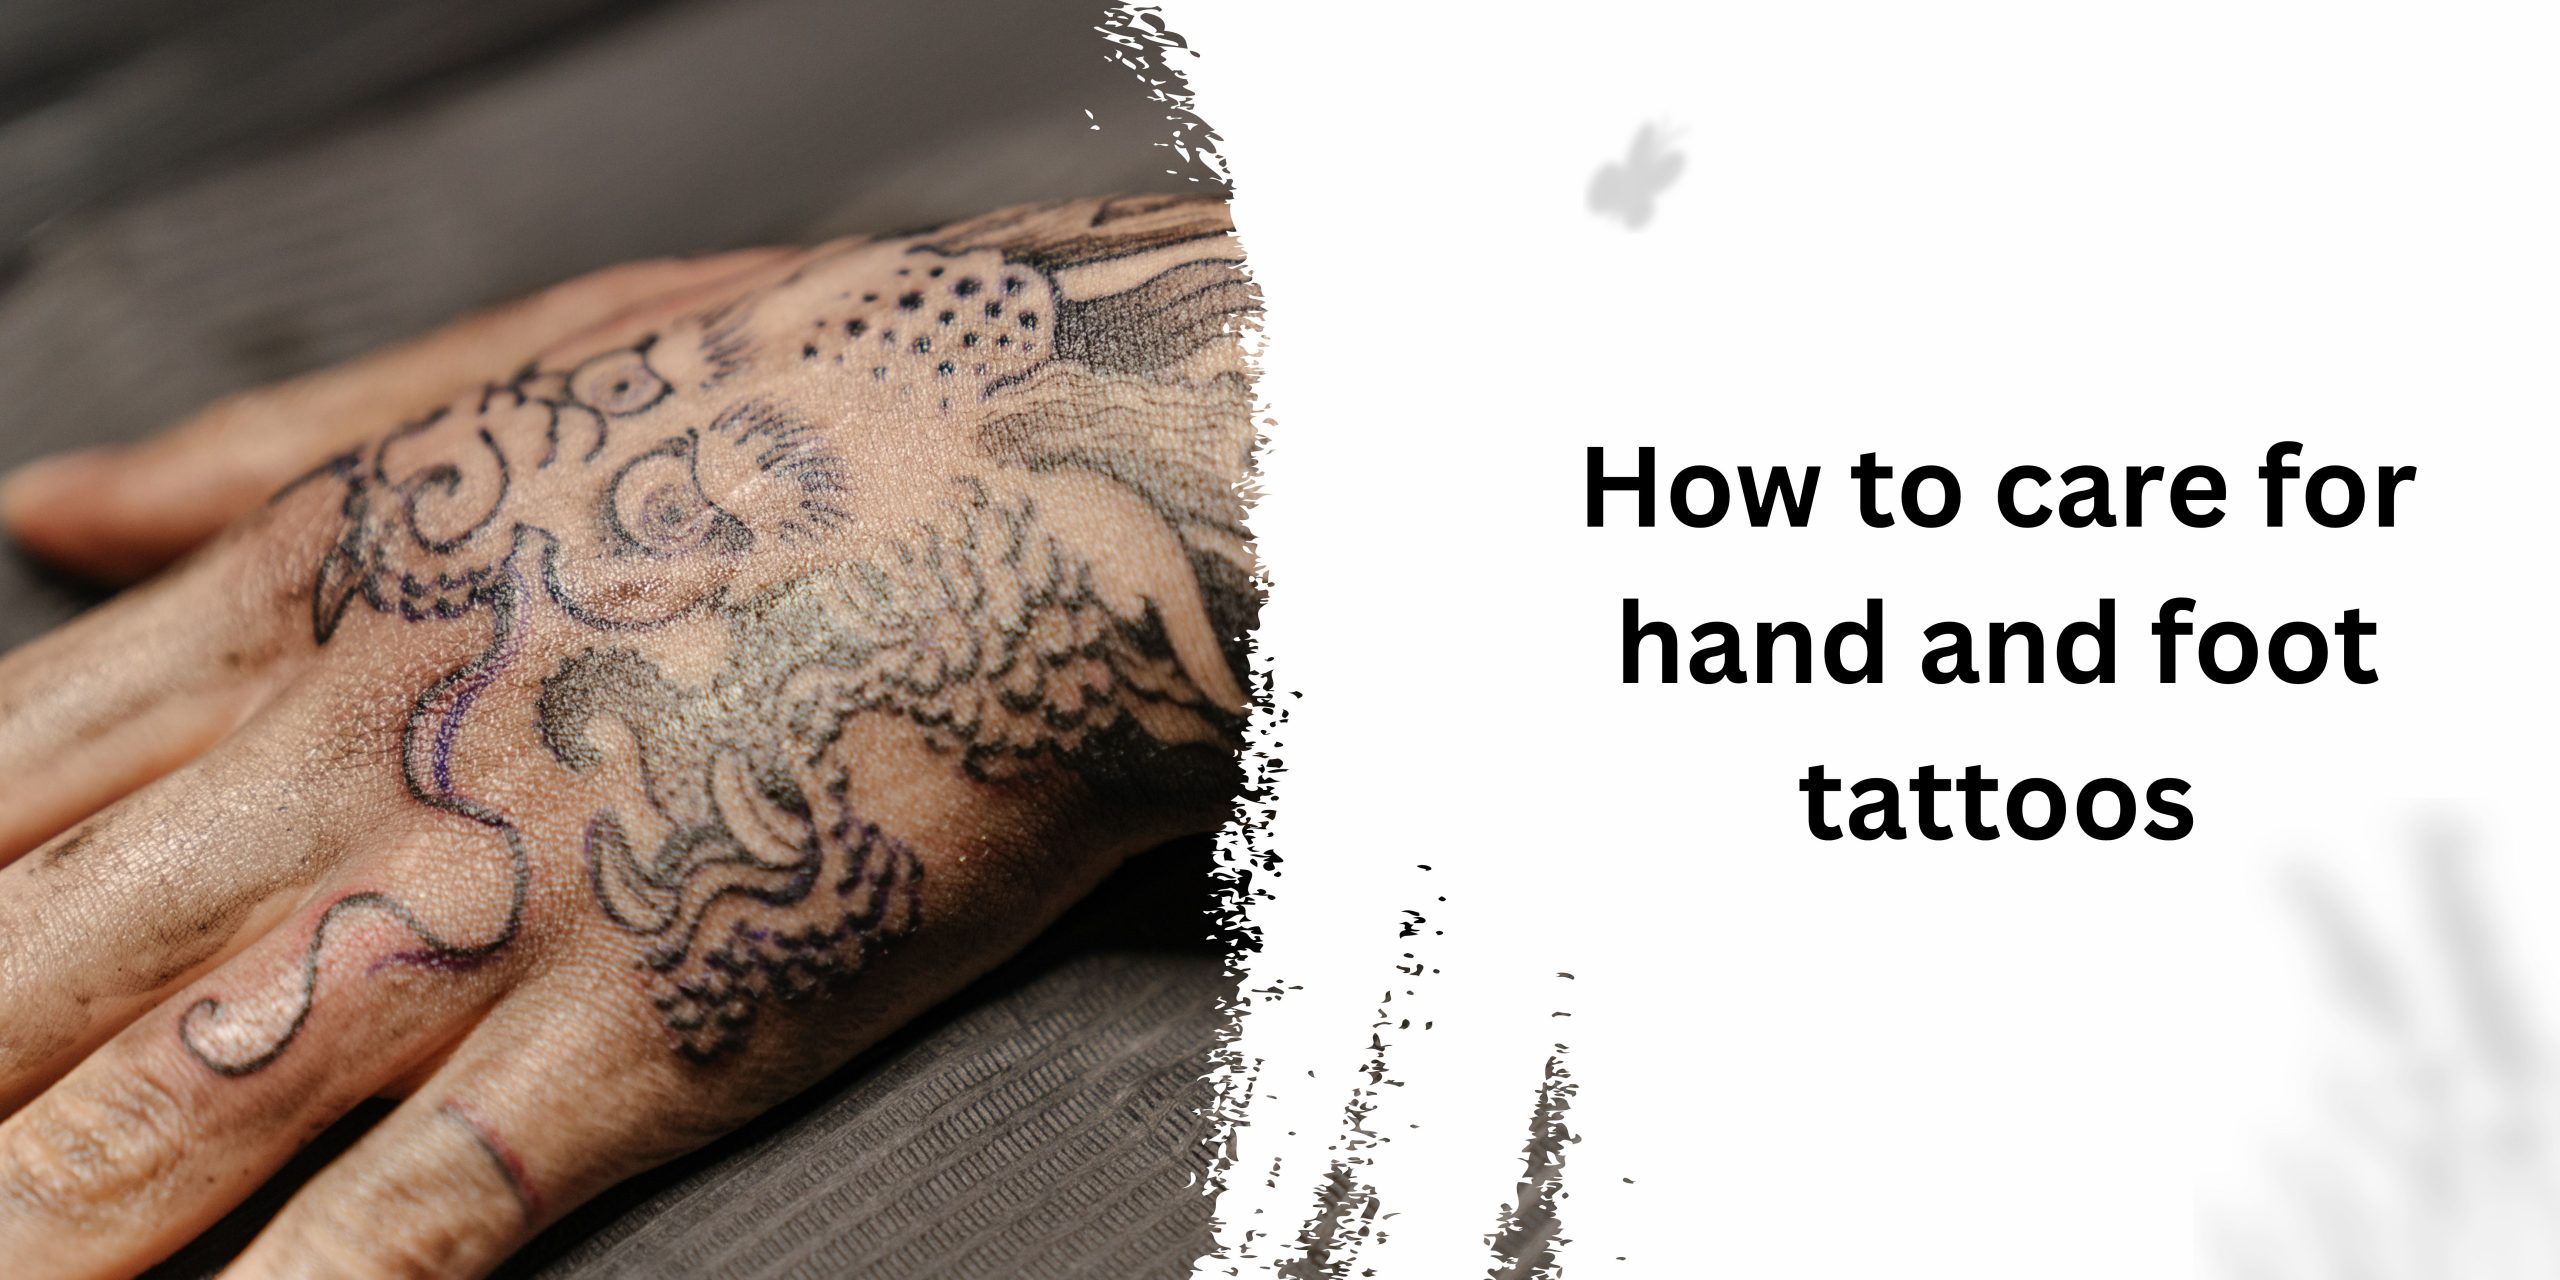 How to care for hand and foot tattoos